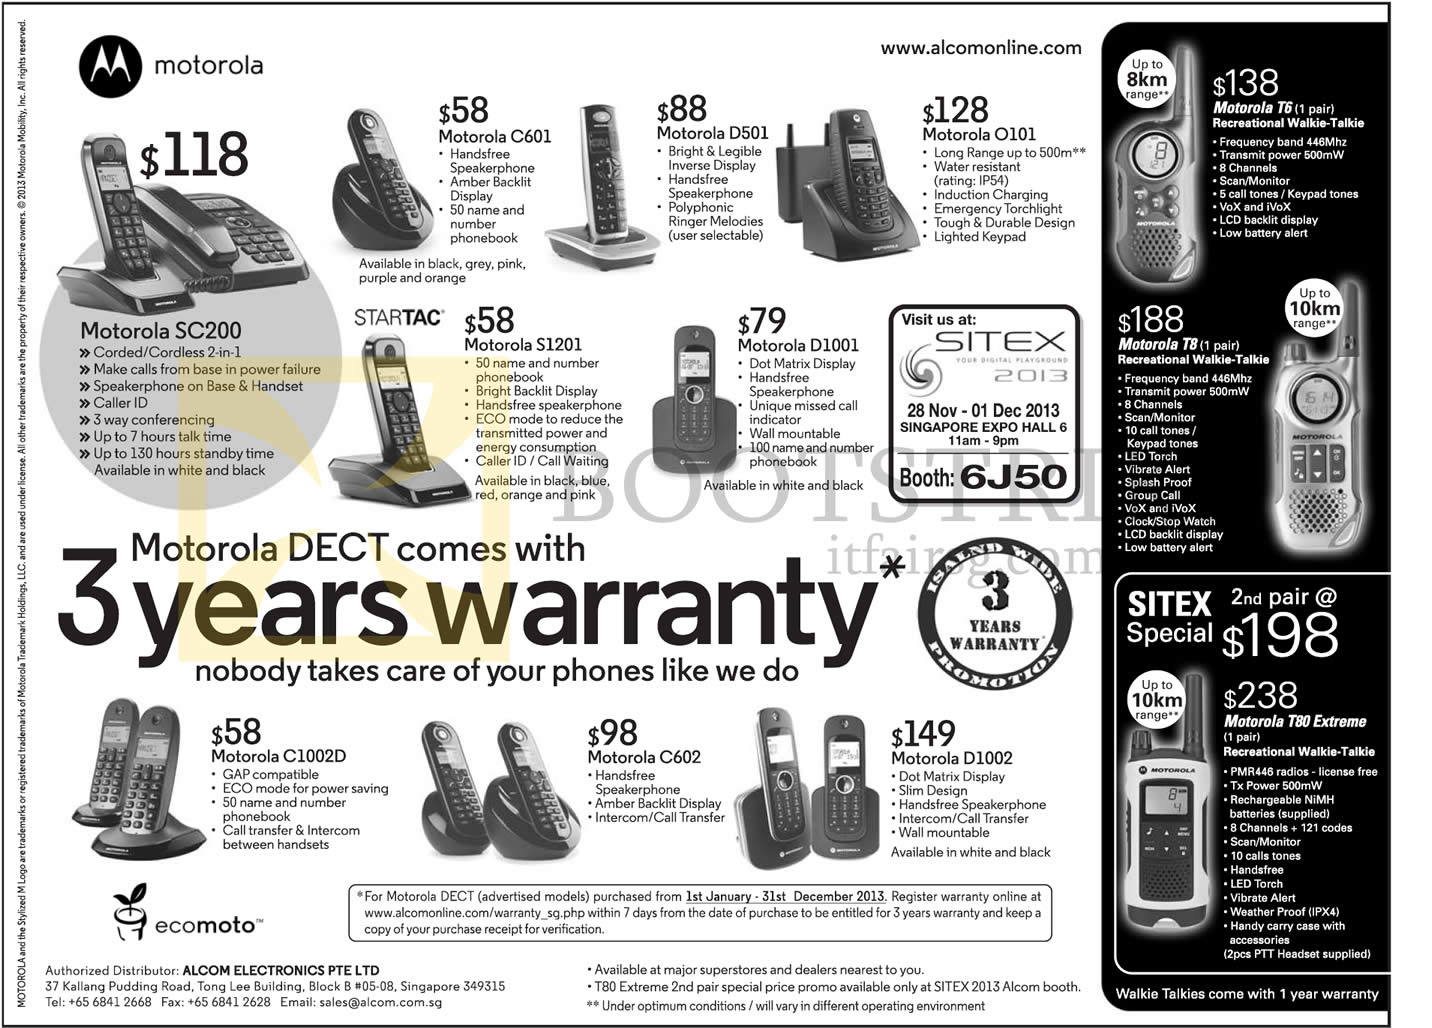 SITEX 2013 price list image brochure of Alcom Motorola Dect Phones SC200 C601 D501 O101 S1201 D1001 C1002D C602 D1002, Walkie Talkie T6 T8 T80 Extreme